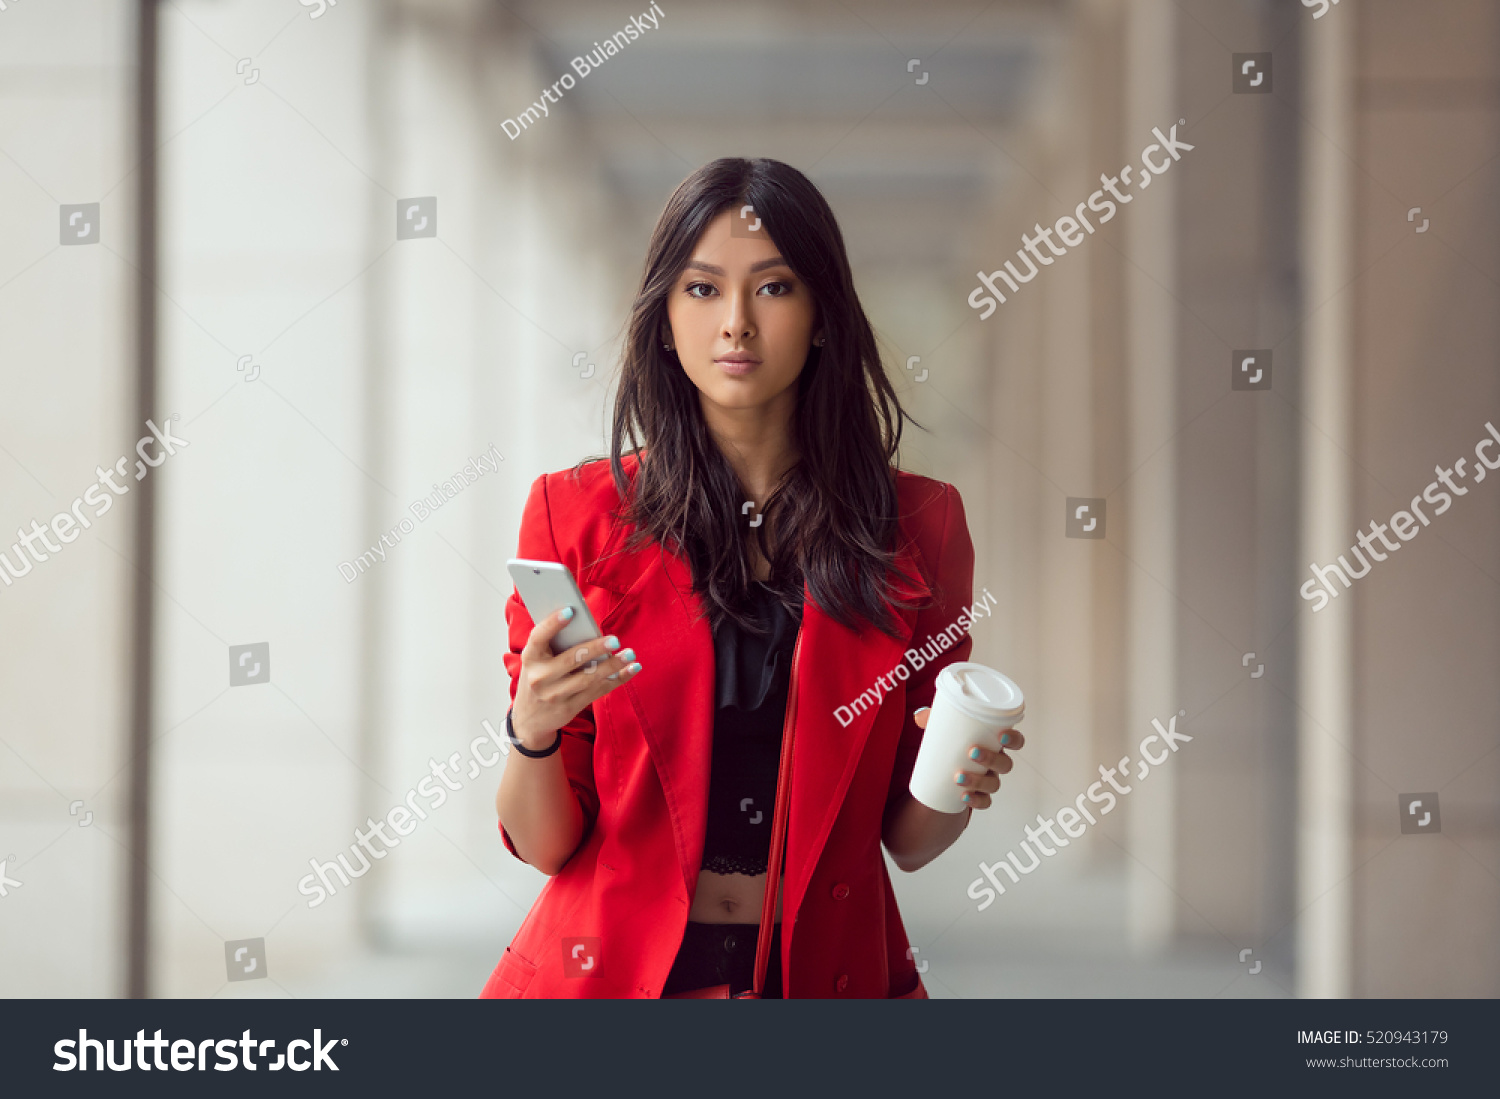 Young Asian woman with smartphone standing against street blurred building background and looking. Fashion business photo of beautiful girl in red casual suite with phone and cup of coffee #520943179